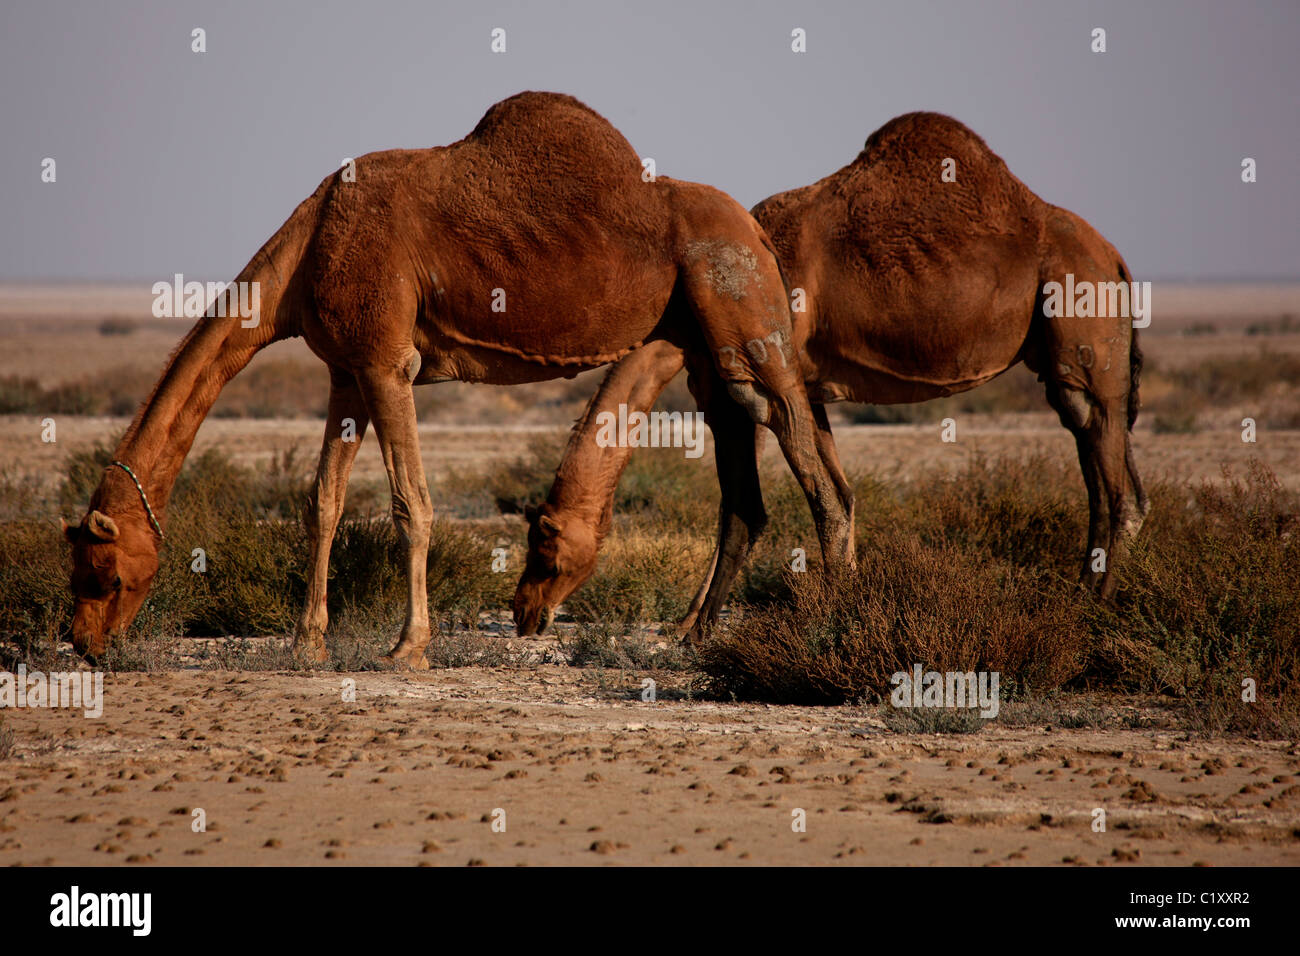 Two wild camels grazing in Rajasthan, India Stock Photo